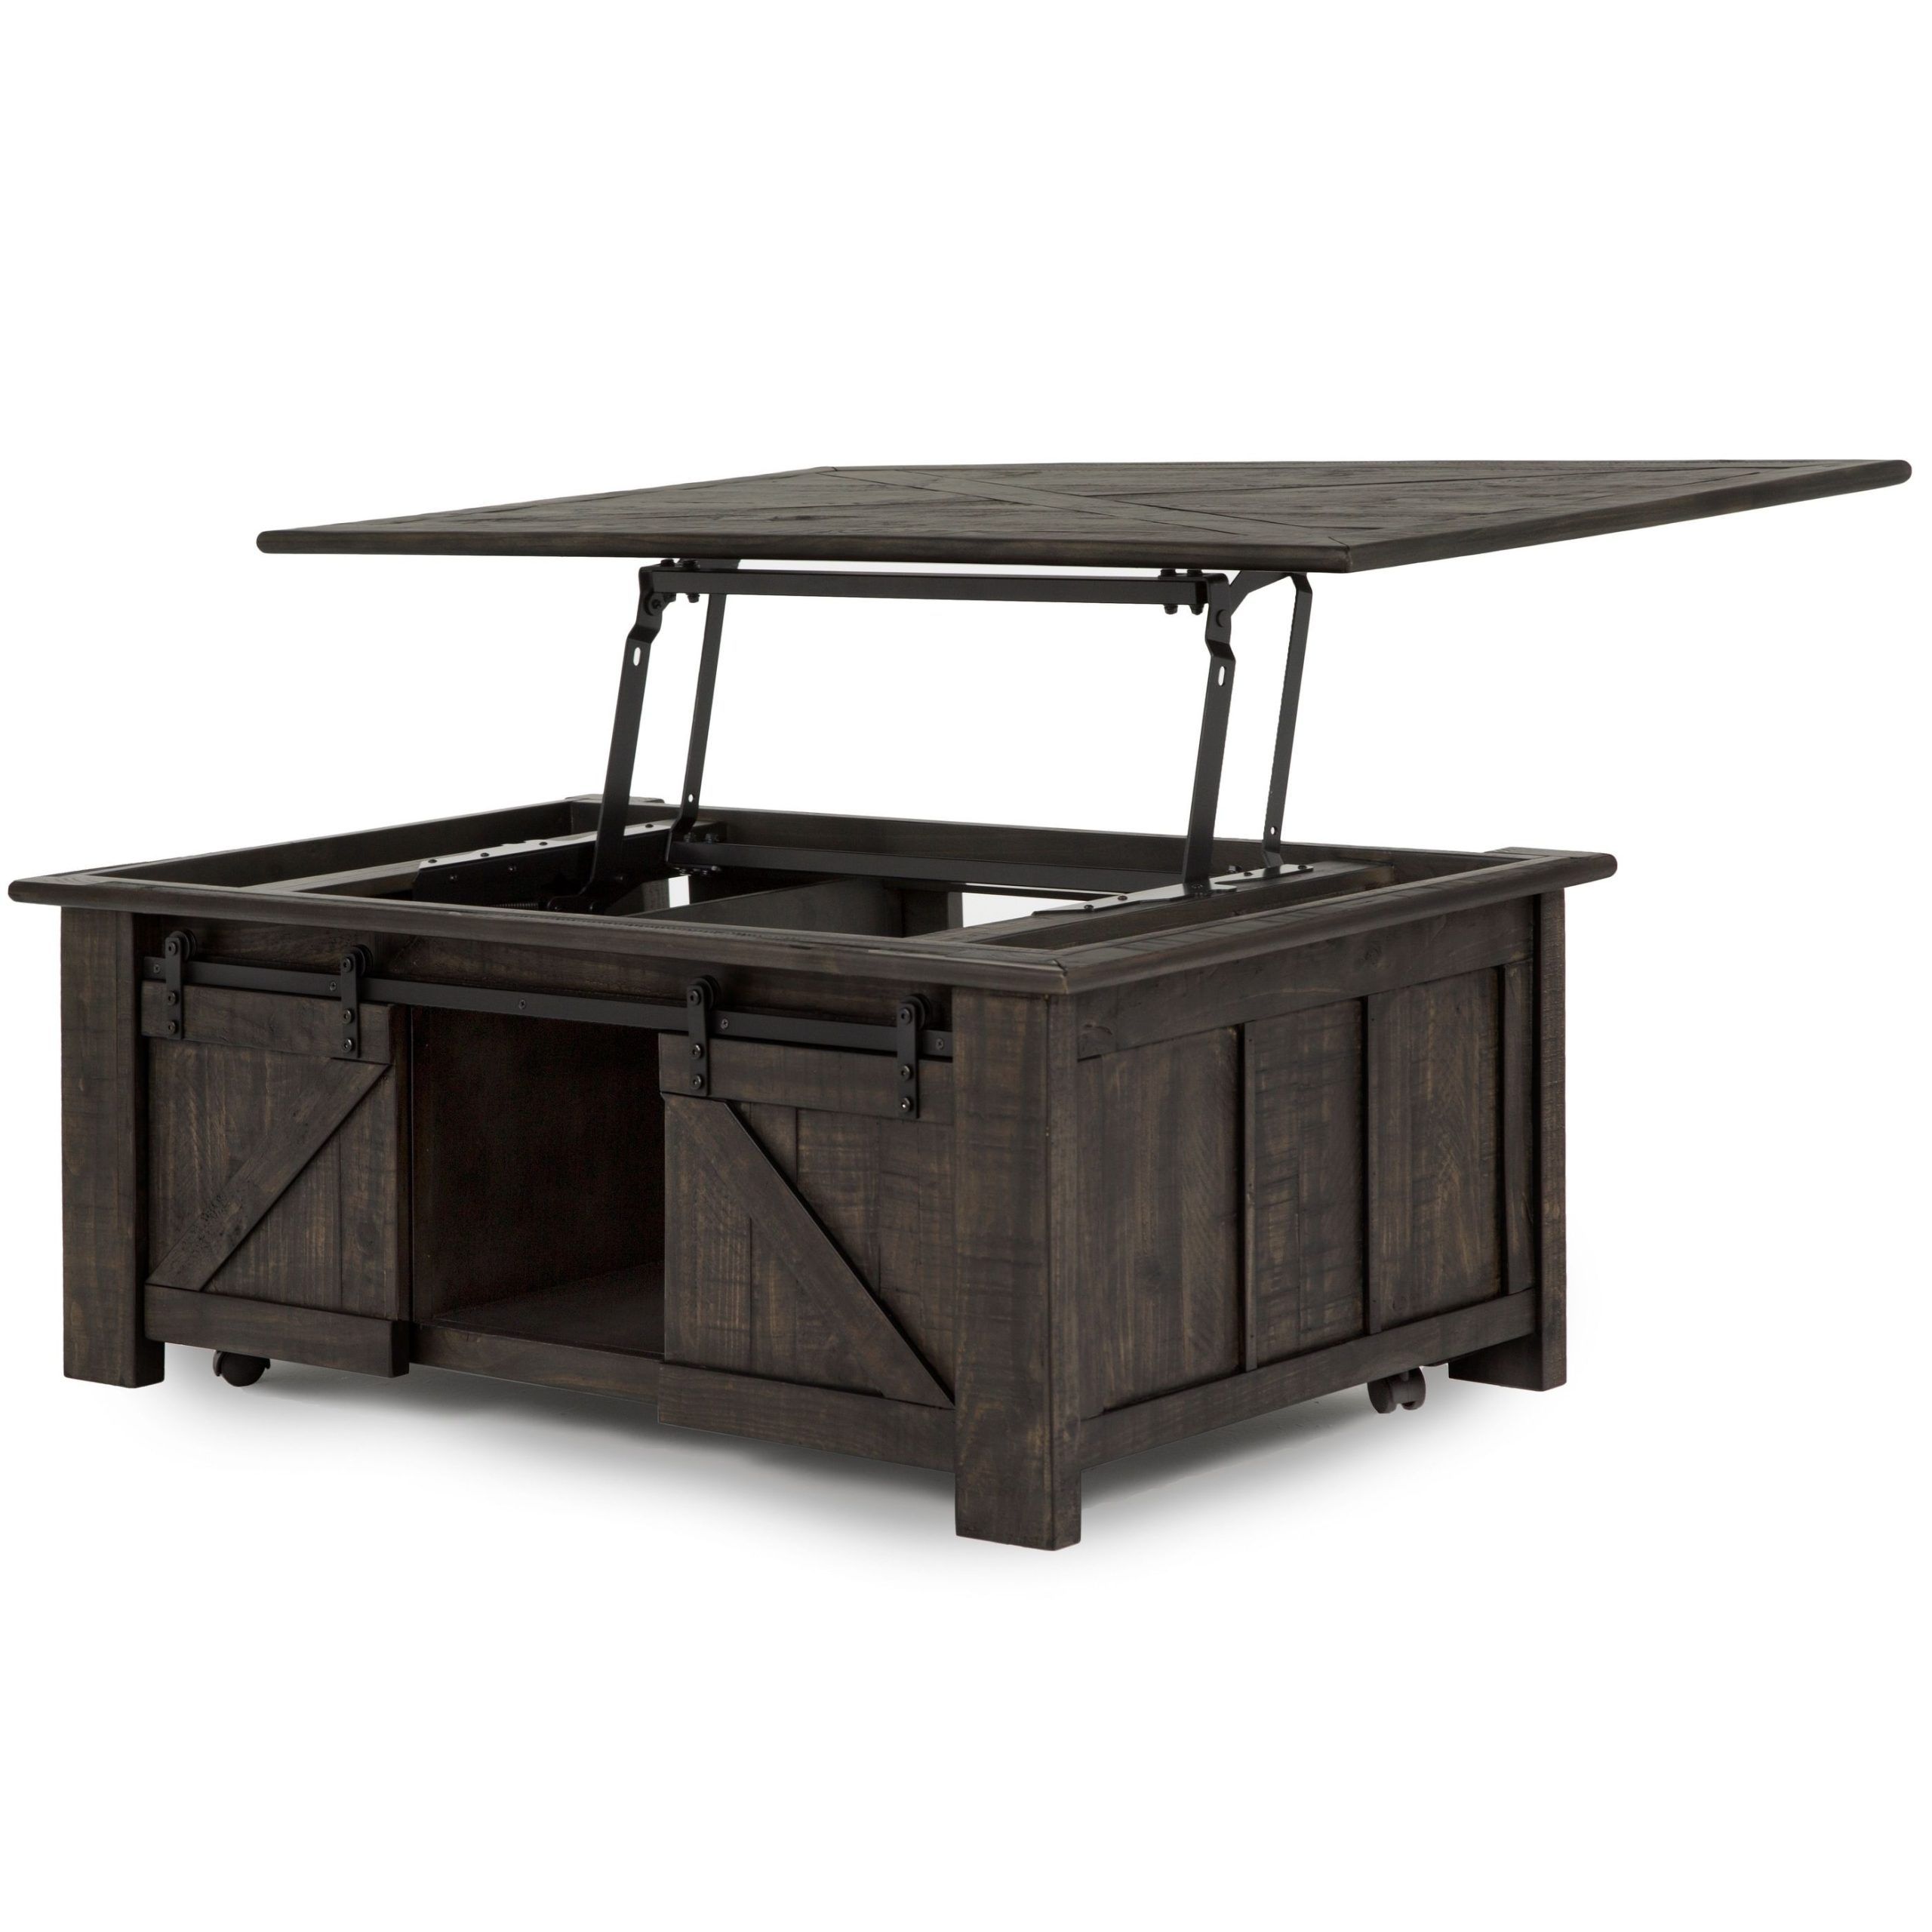 Garrett Rustic Weathered Charcoal Lift Top Sliding Door Coffee Table With Coffee Tables With Sliding Barn Doors (View 9 of 20)